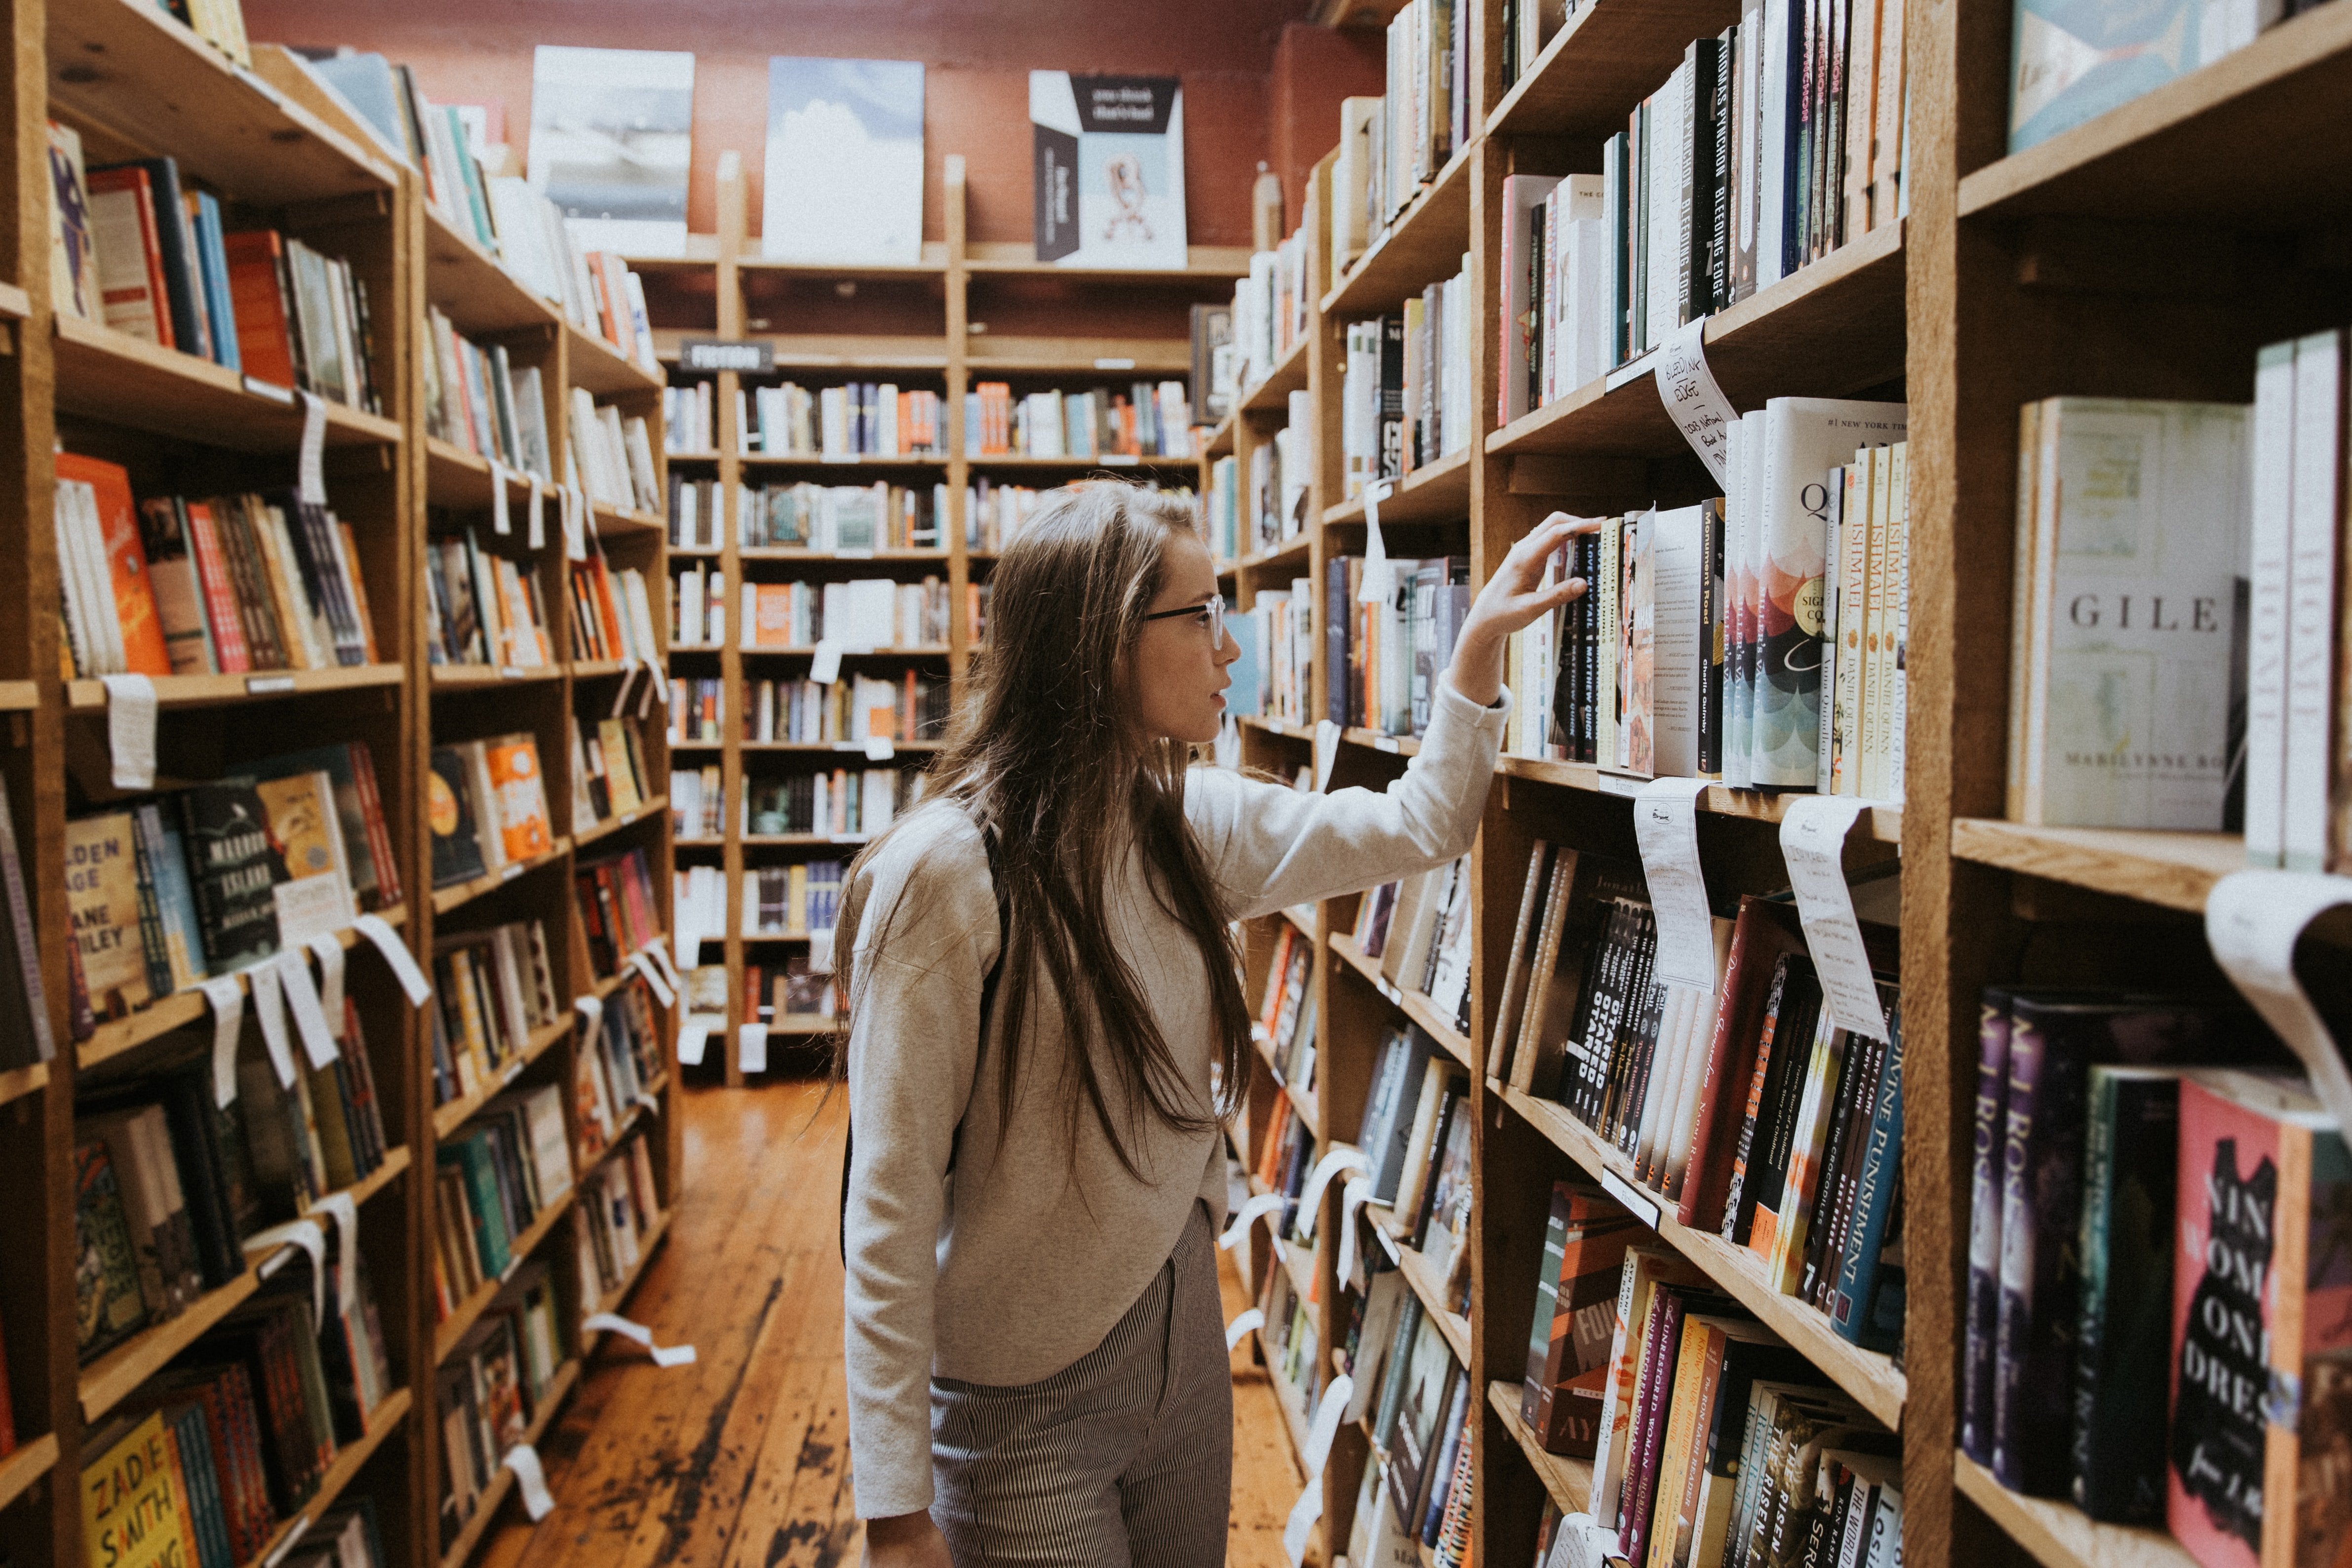 Janet worked as a librarian for 15 years, surrounded by what she loved the most -- books. | Source: Unsplash